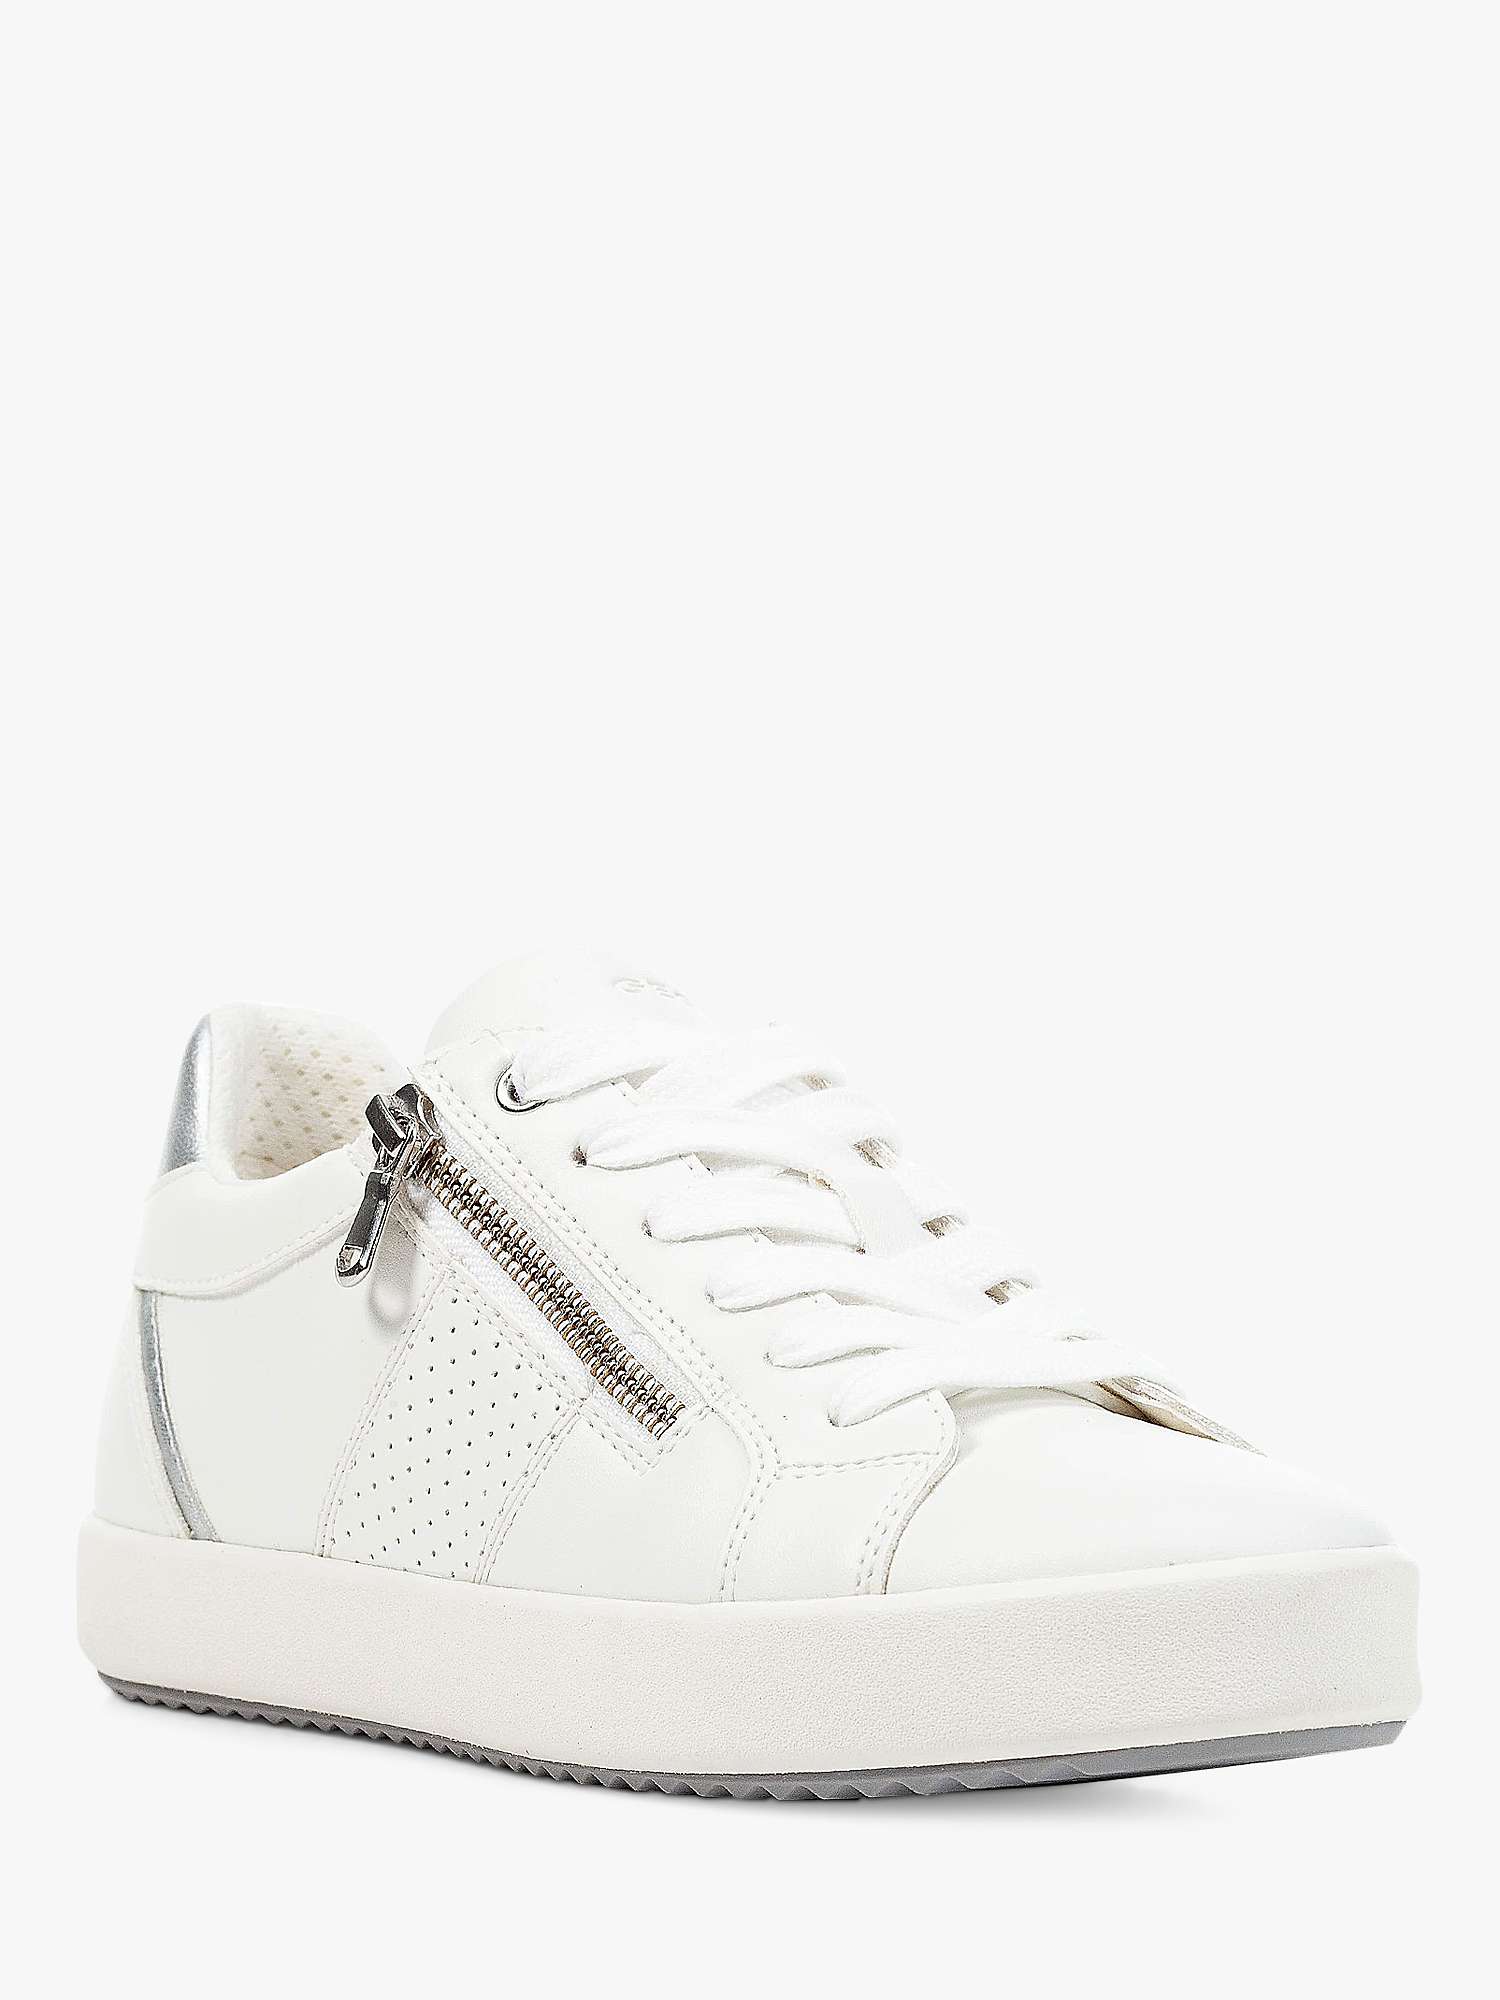 Buy Geox Blomiee Lightweight Zip Detail Trainers, White/Silver Online at johnlewis.com